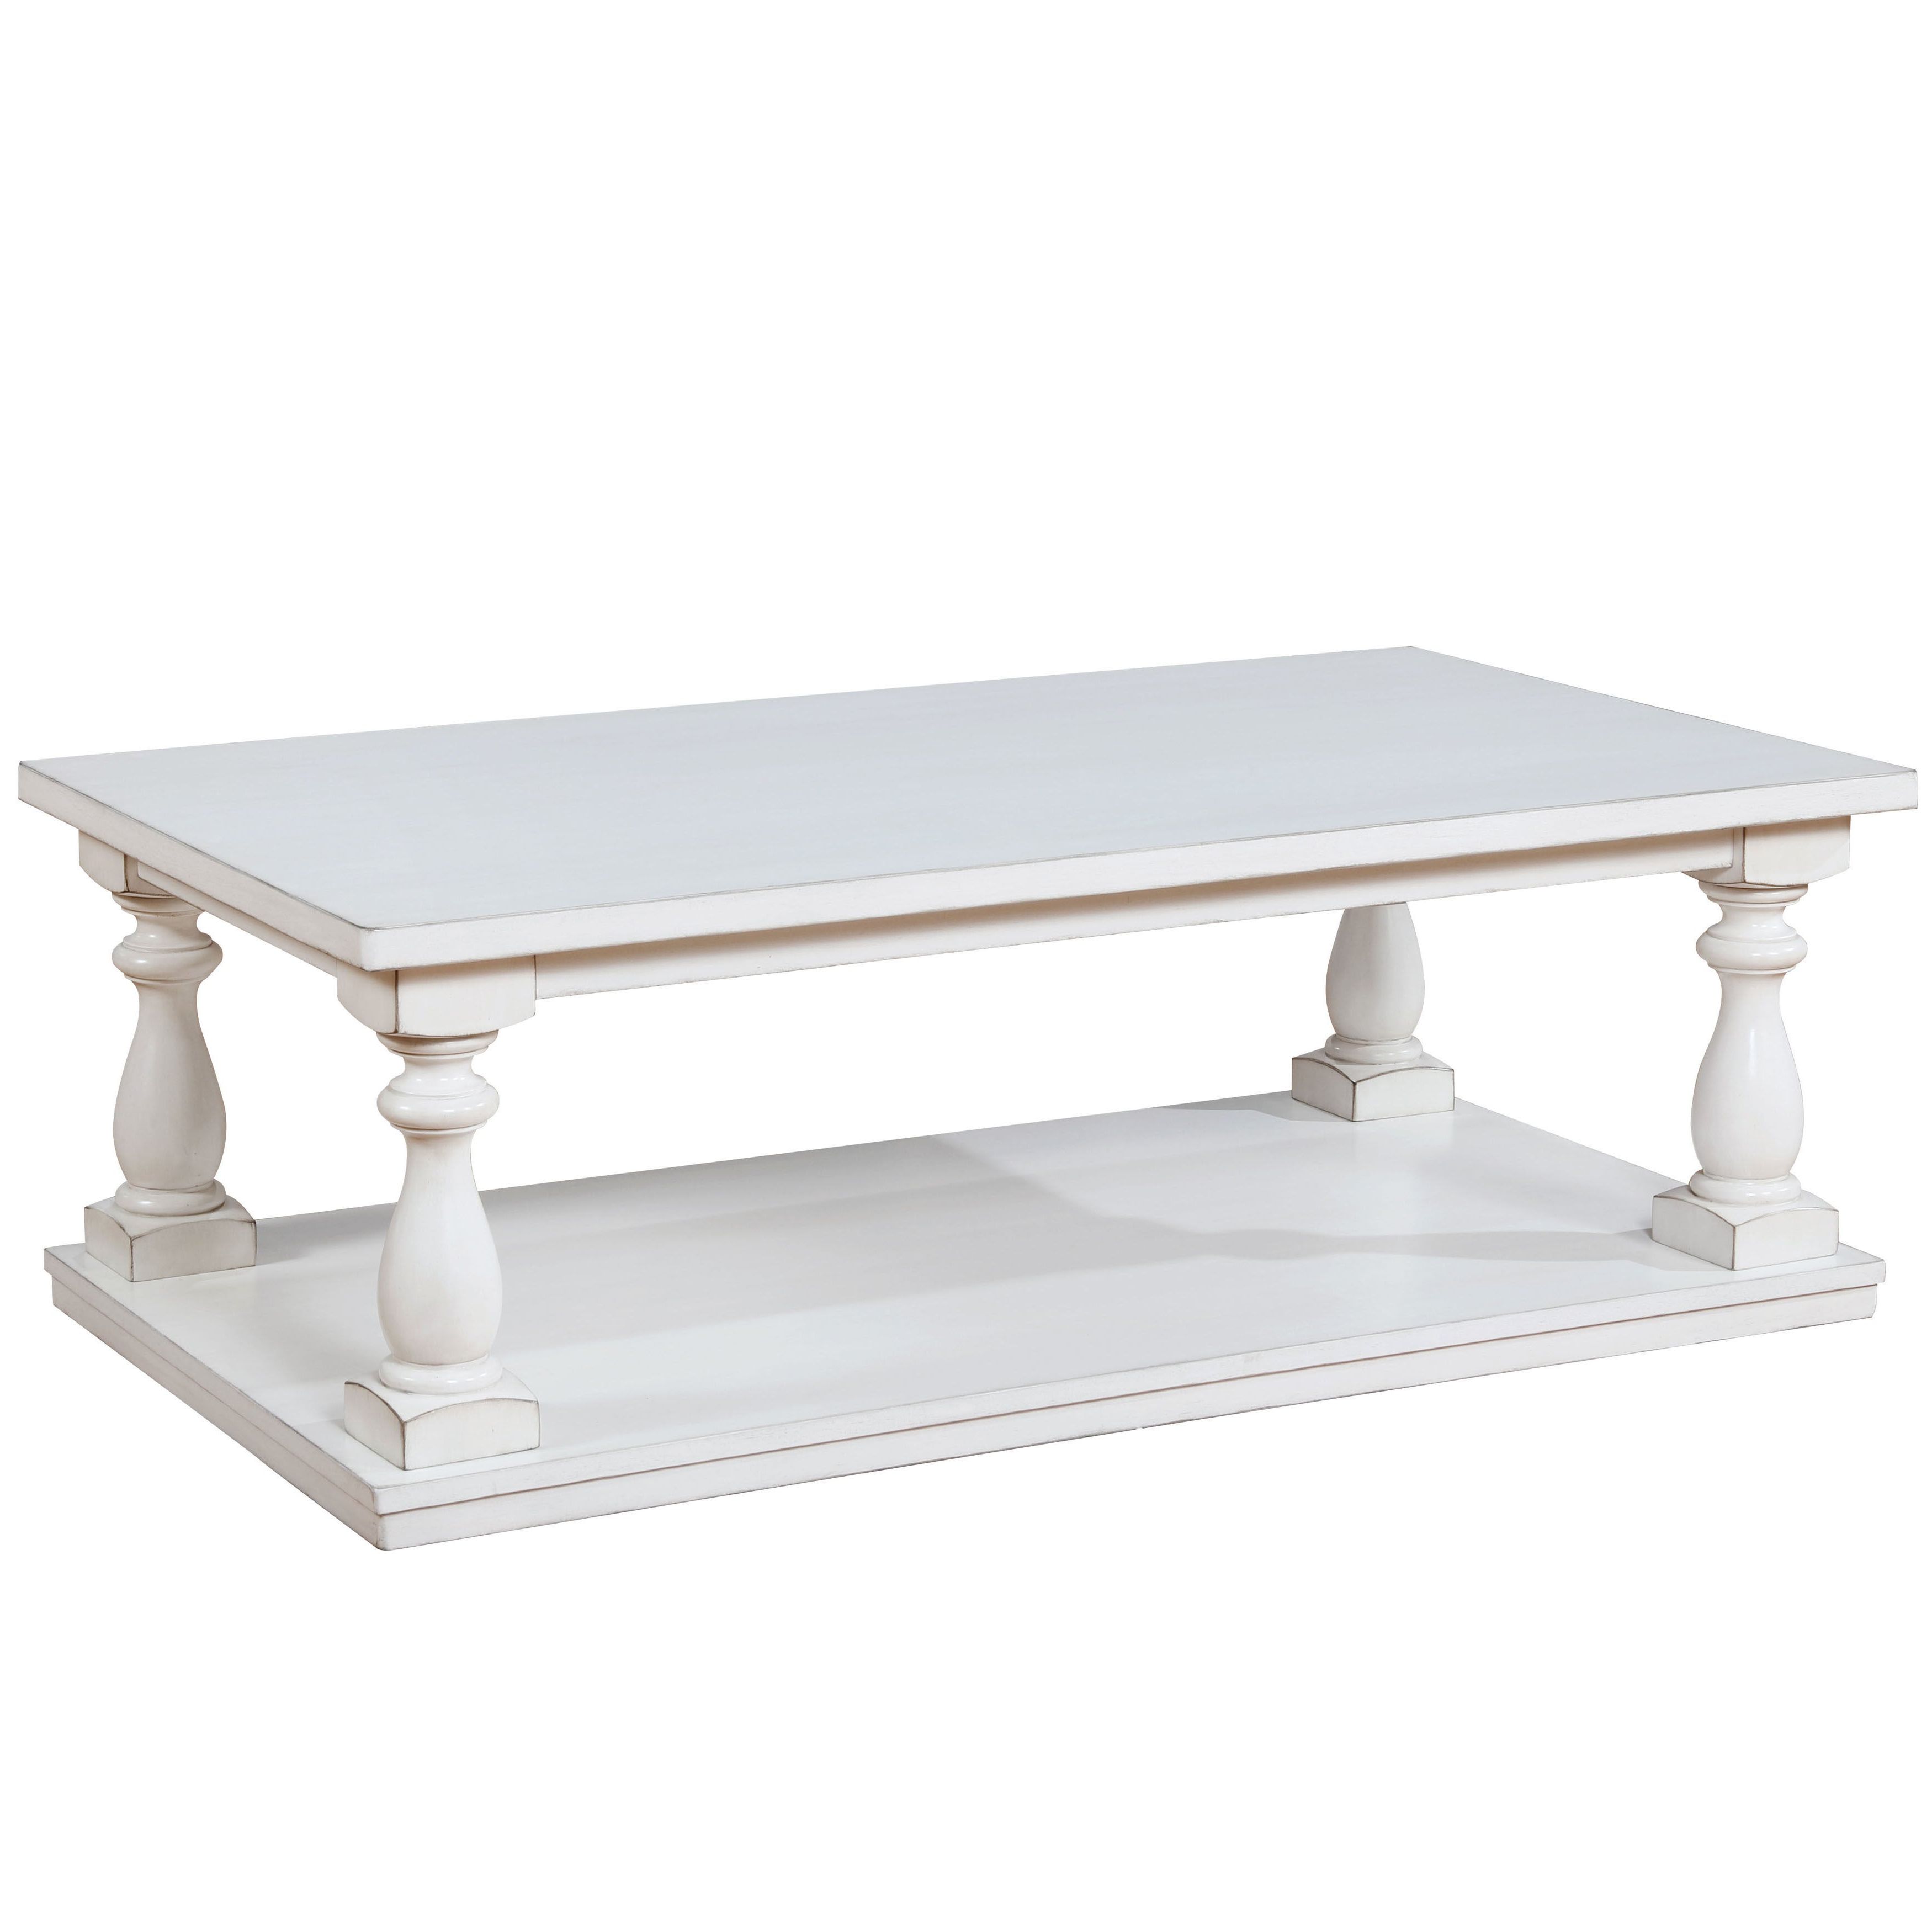 Jessa Rustic Country 54 Inch Coffee Tablefoa Inside Latest Jessa Rustic Country 54 Inch Coffee Tables (View 7 of 20)